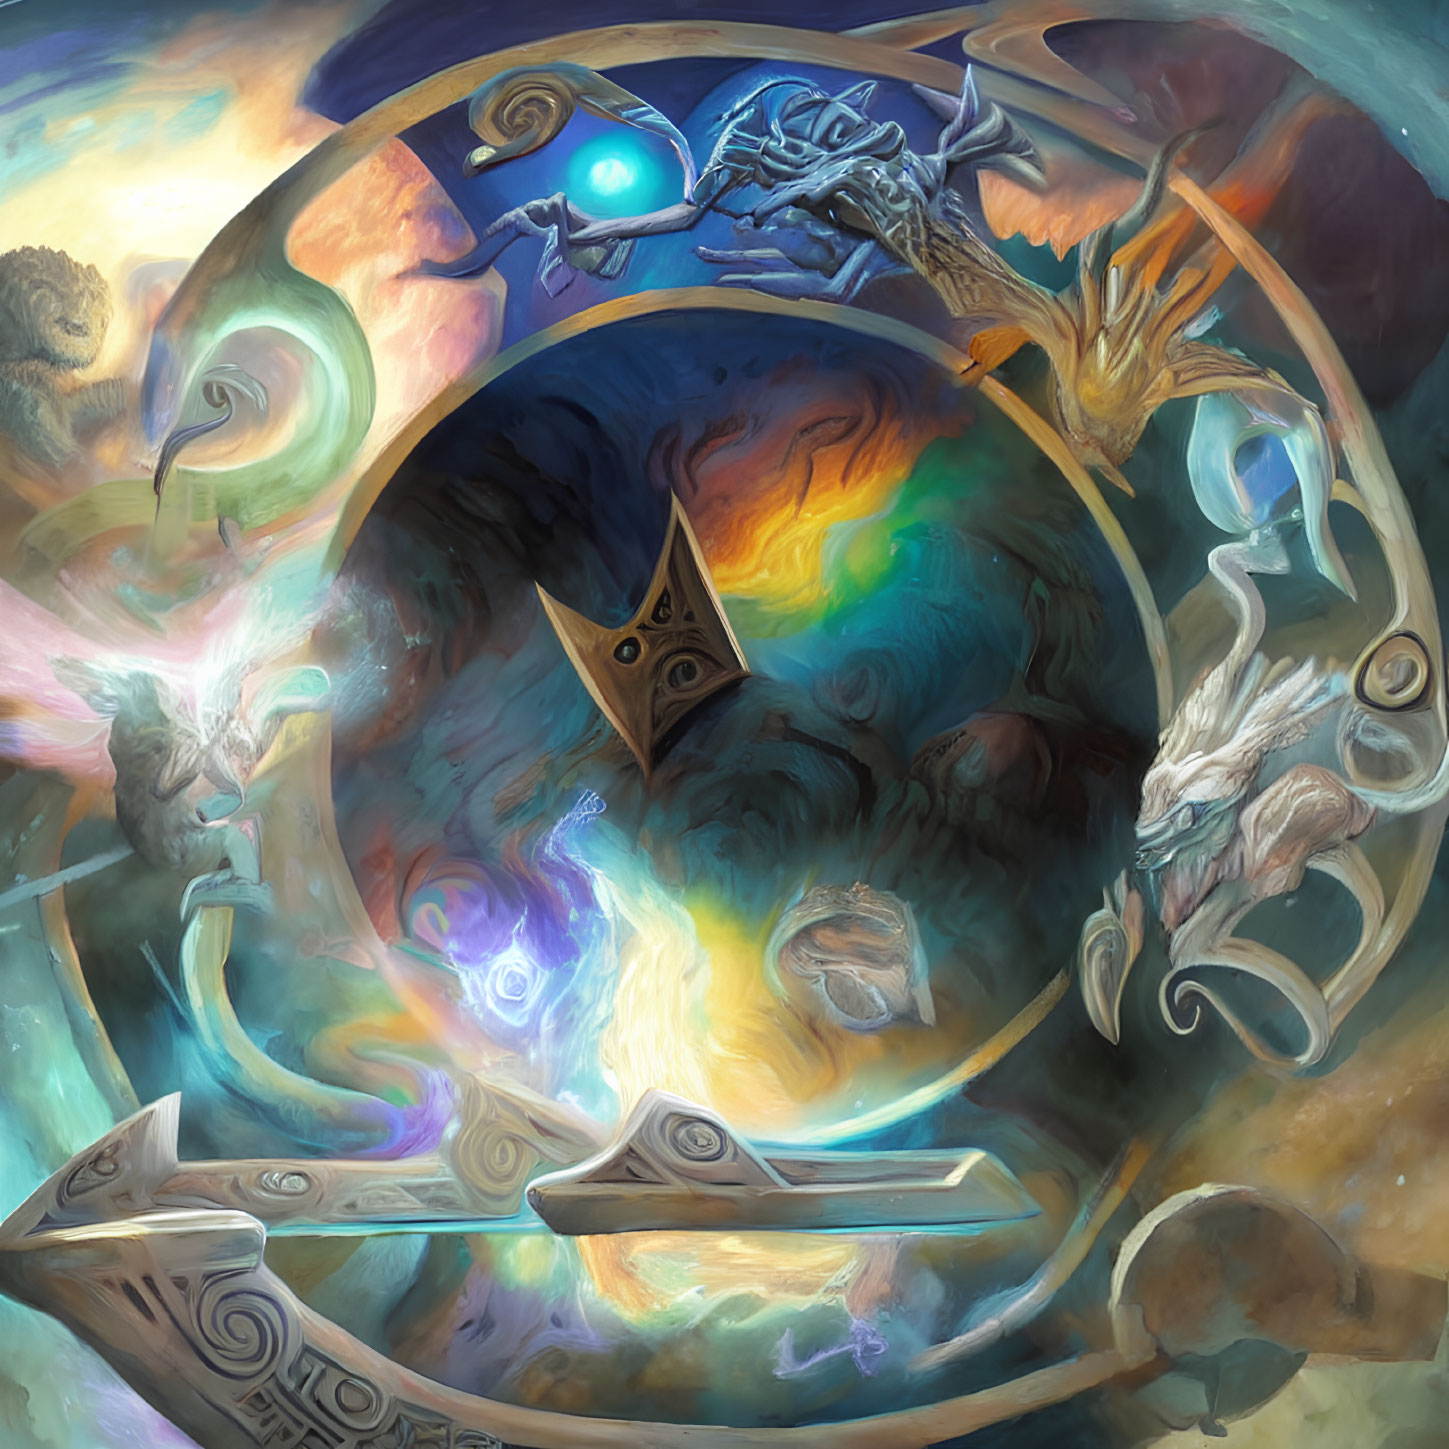 Fantasy-themed illustration of ornate celestial portal with mythical creatures.